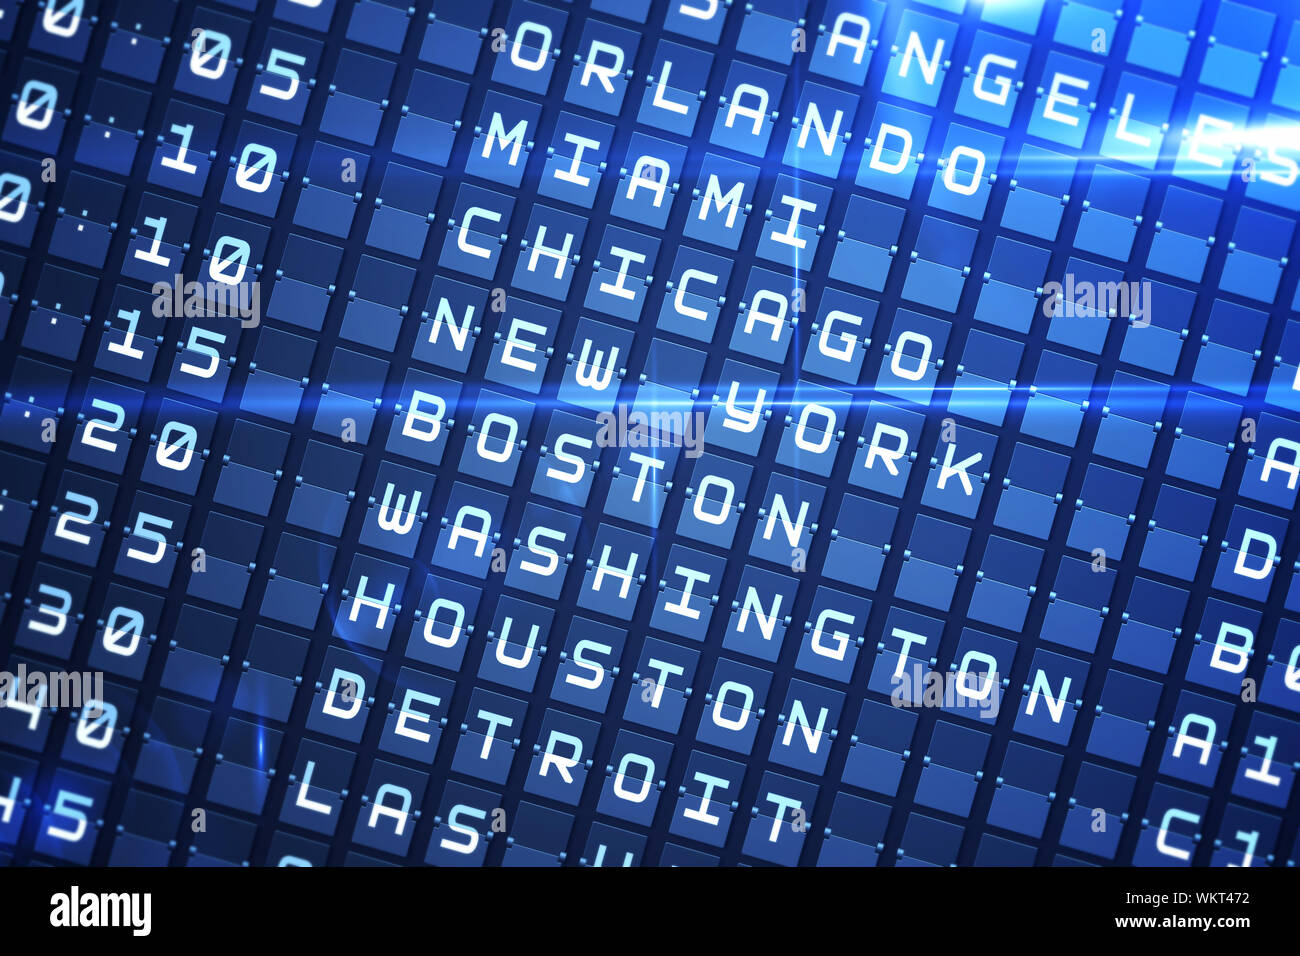 Digitally generated blue departures board for major usa cities Stock Photo